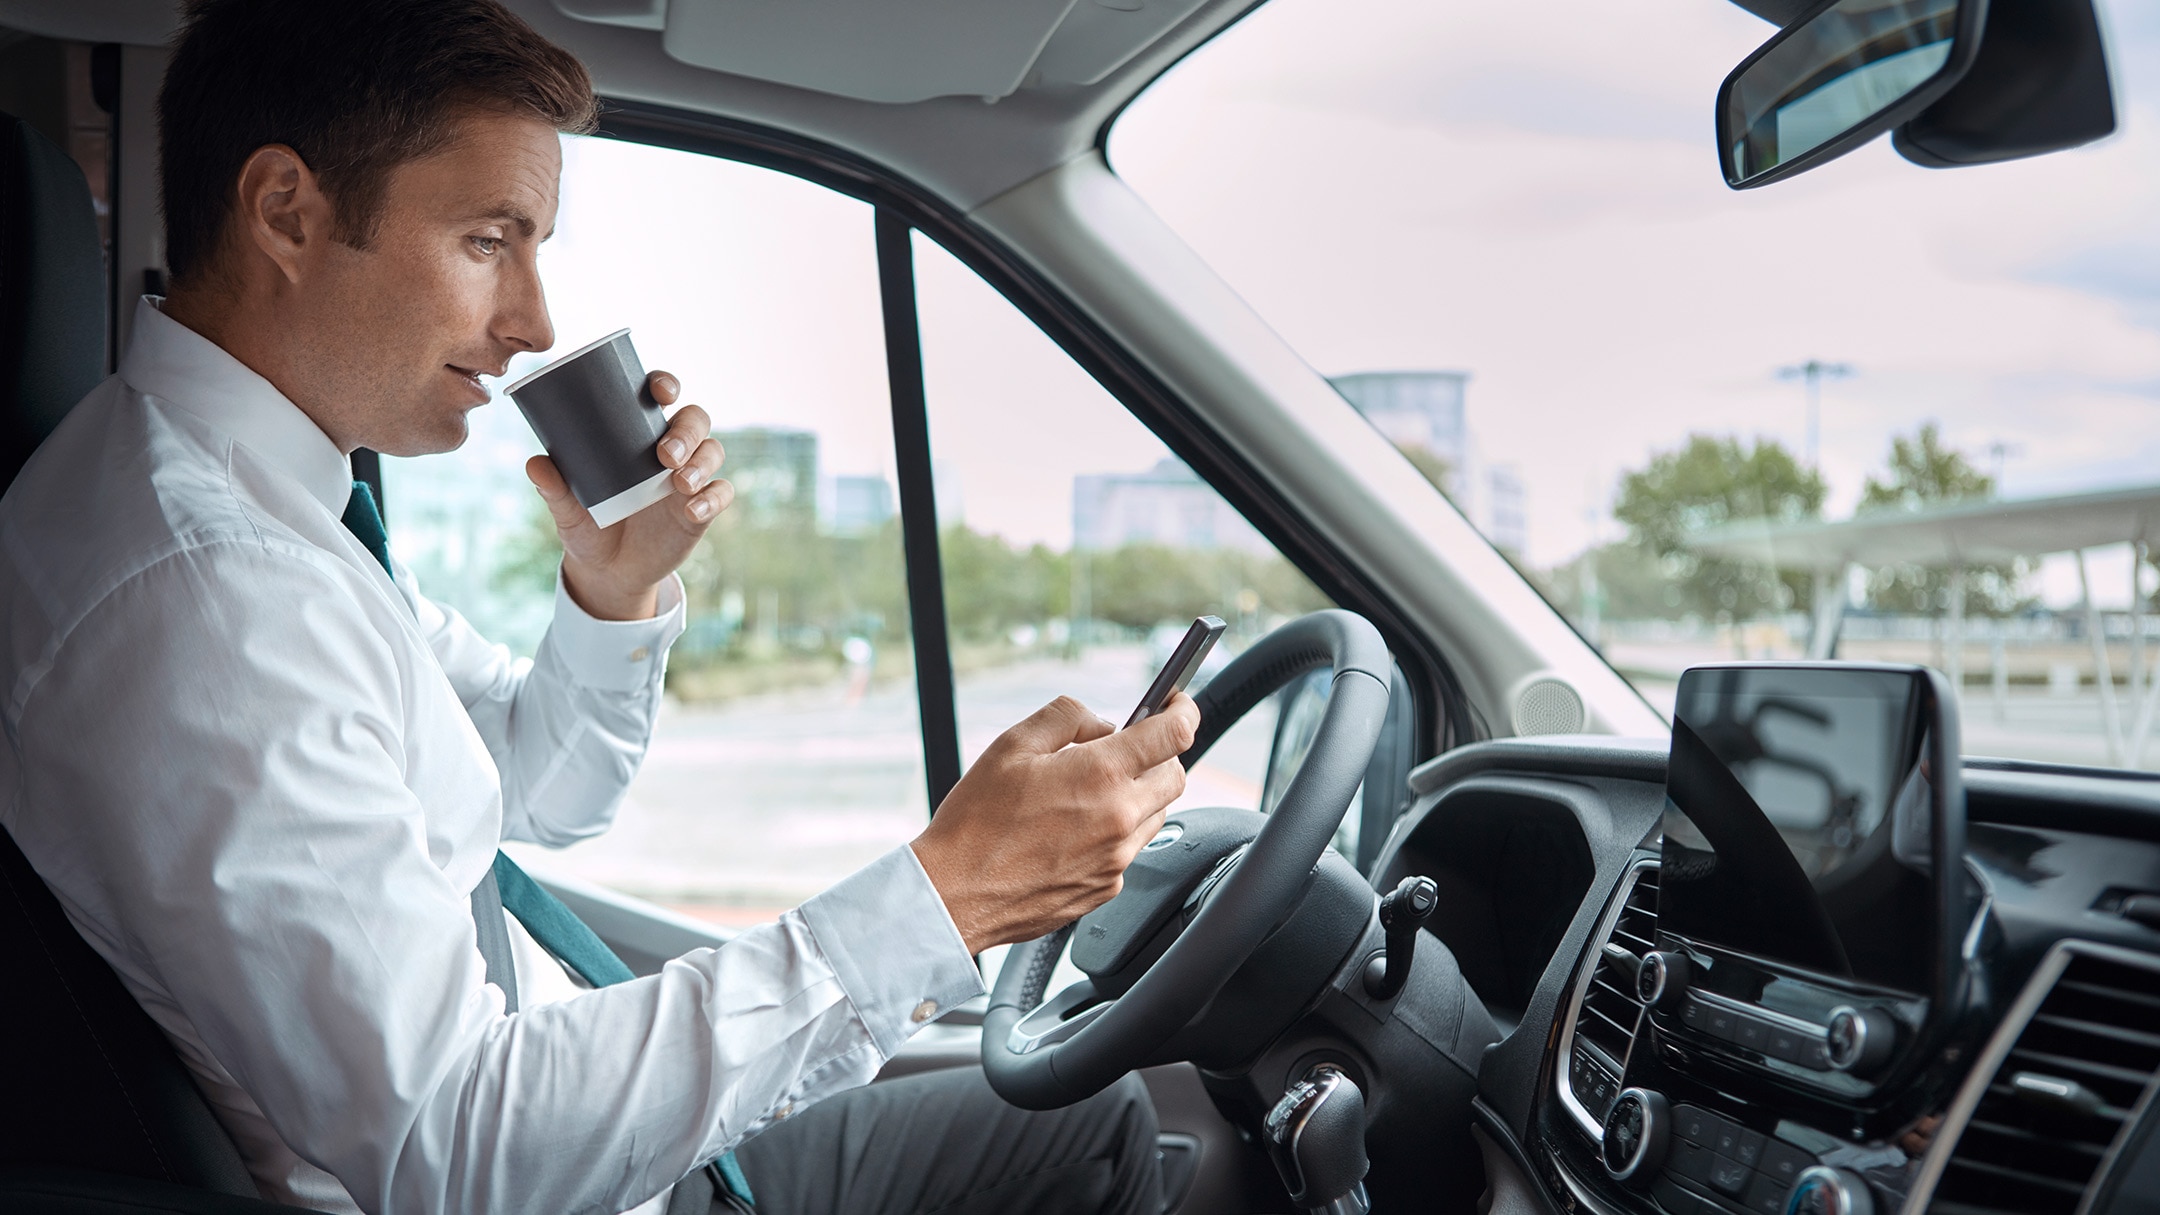 Driver sitting behind driving wheel drinking coffee